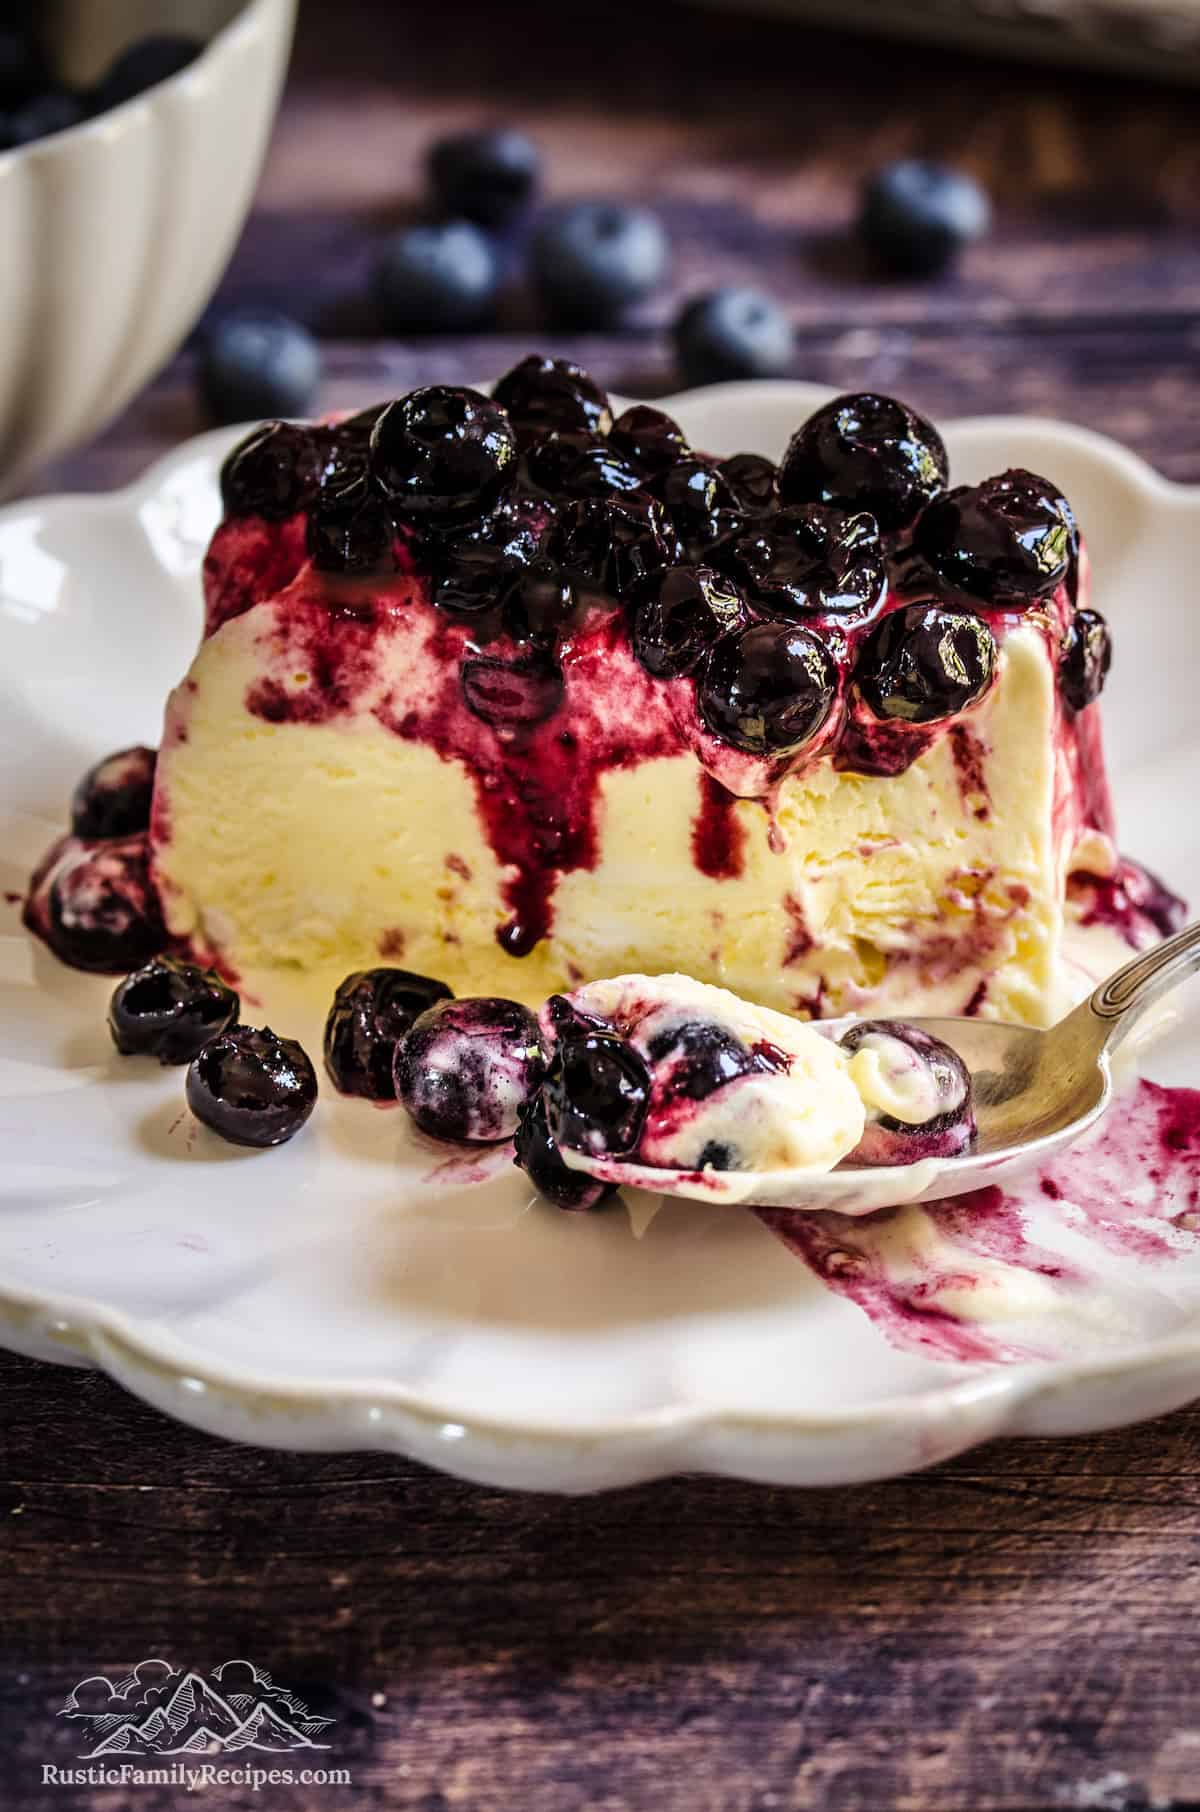 A slice of lemon blueberry semifreddo on a plate, topped with blueberry sauce next to a spoonful of semifreddo..